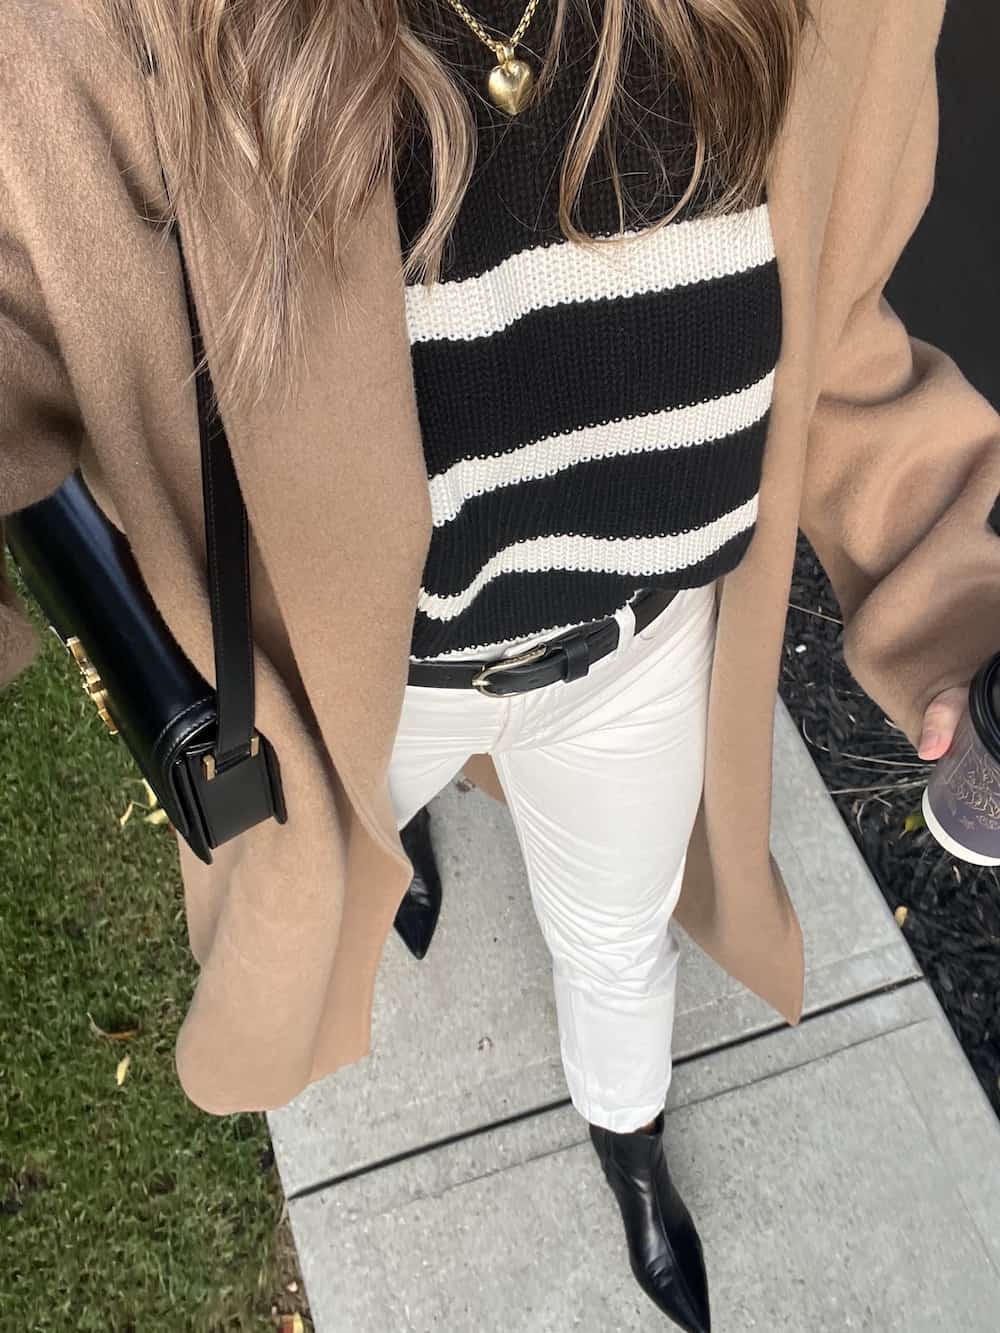 Christal wearing a camel Jenni Kayne cashmere overcoat with a striped black sweater and off-white jeans